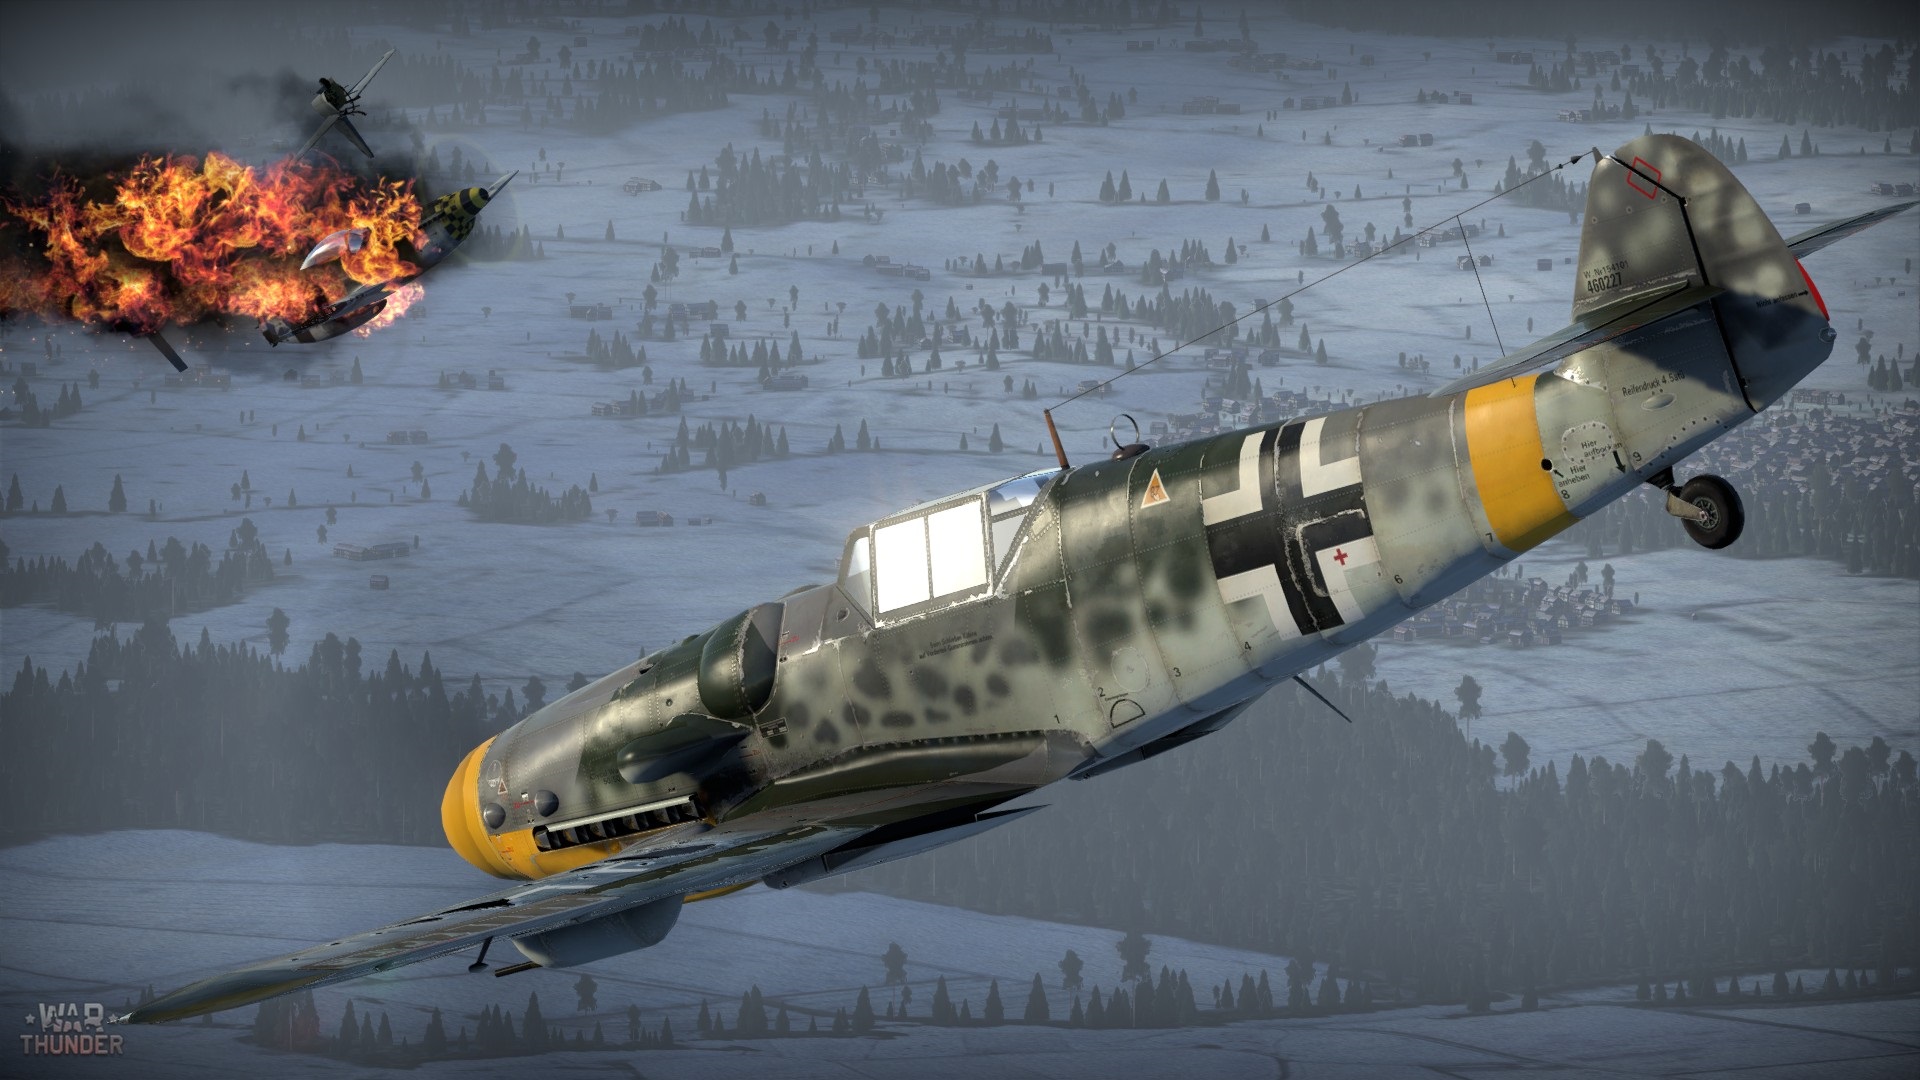 bf109s-inaction-2bsb8k.jpg